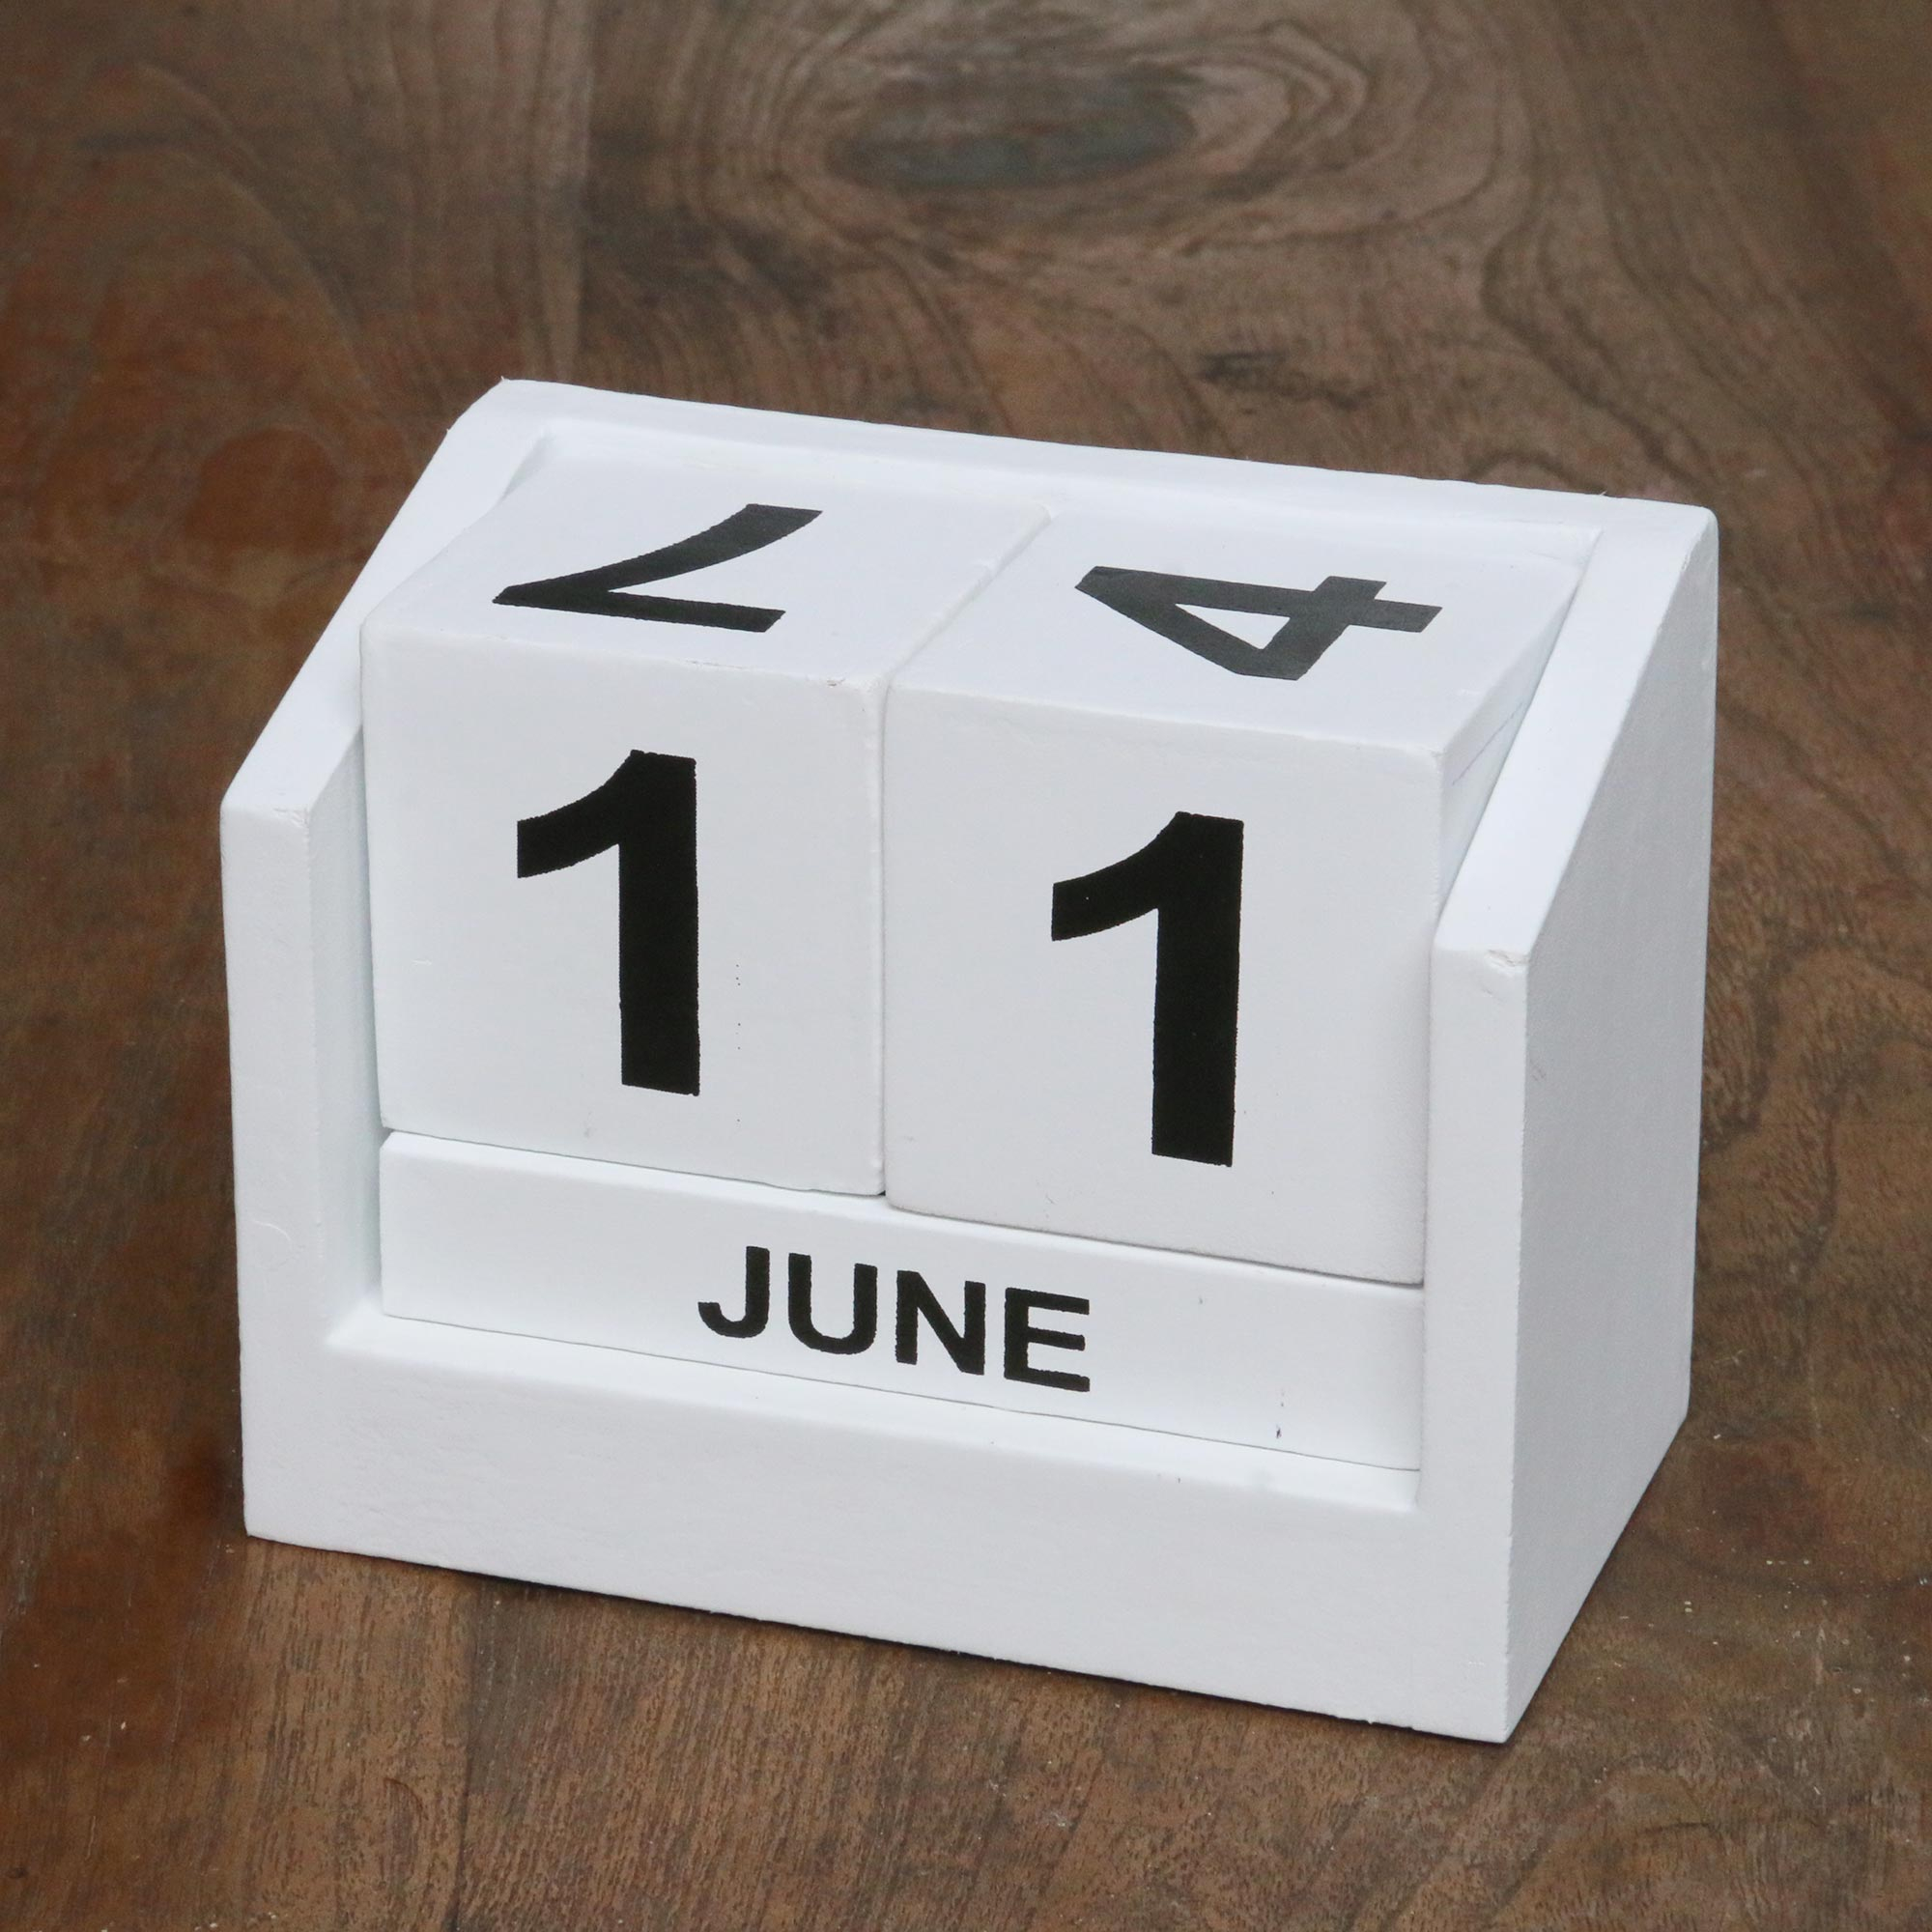 Wood Perpetual Calendar in White from Bali - Counting the Days in White ...